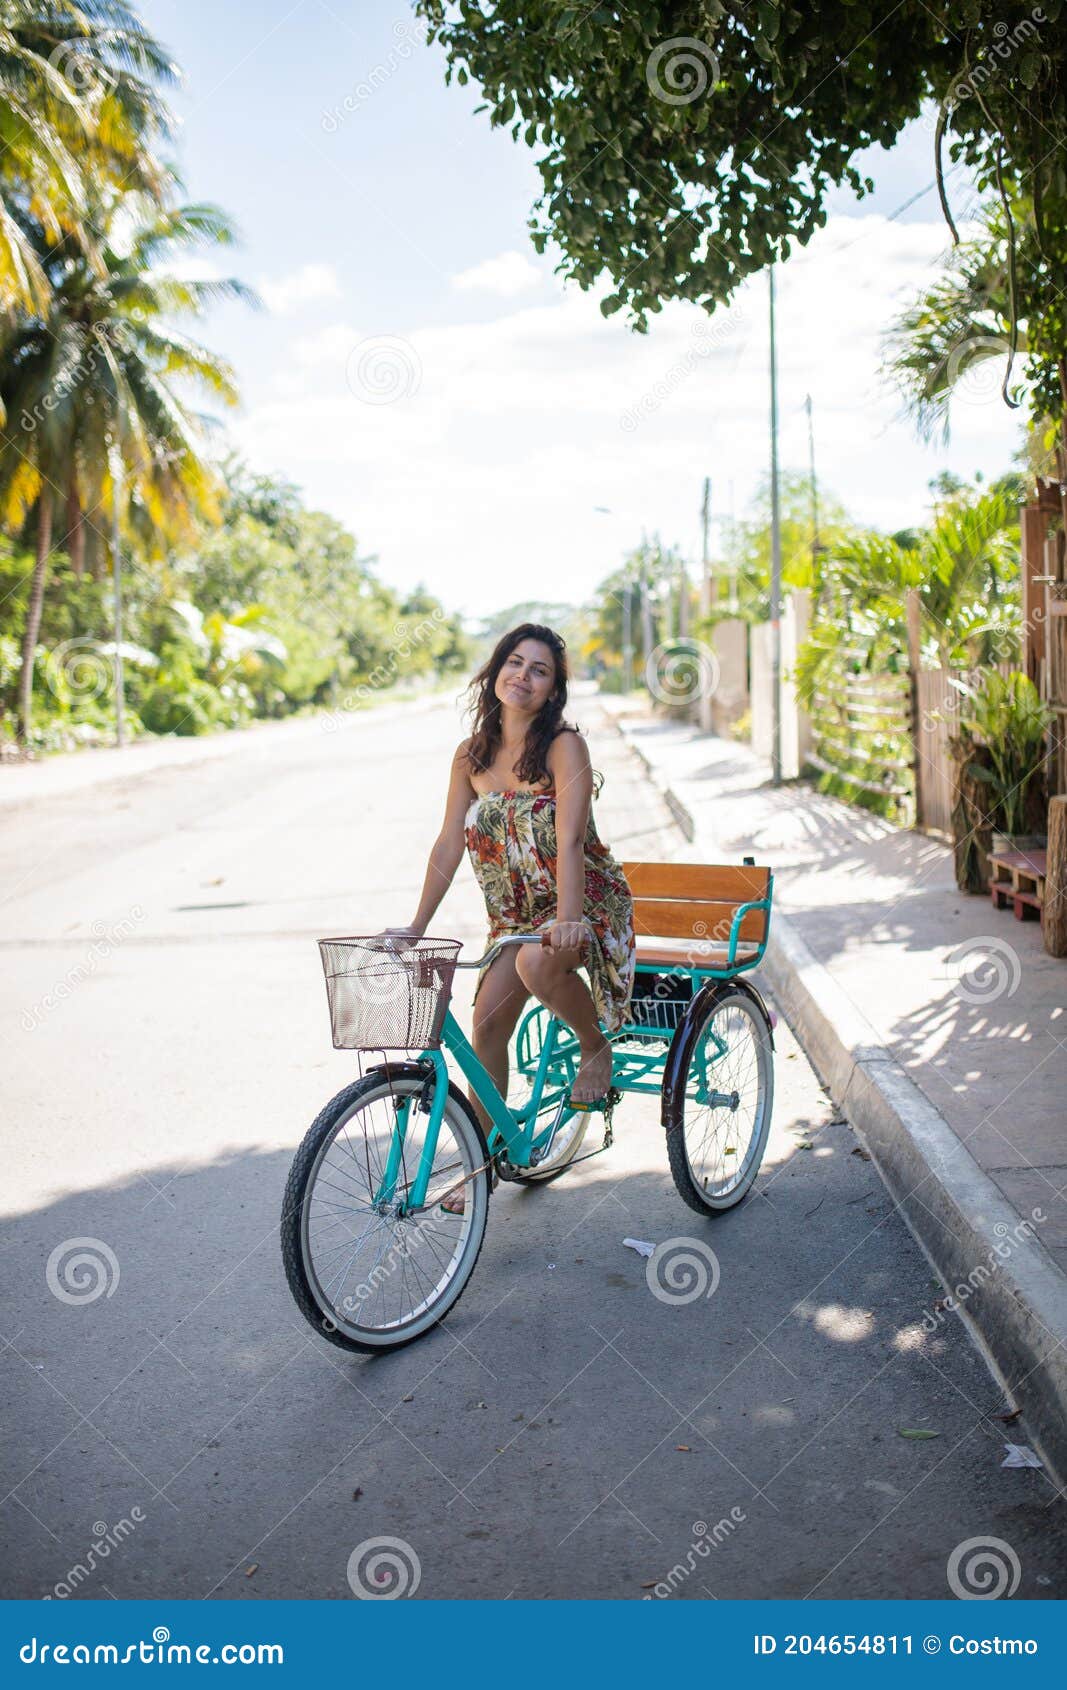 https://thumbs.dreamstime.com/z/beautiful-woman-wearing-dress-riding-adult-tricycle-happy-flowered-portrait-bike-empy-street-ride-sunny-day-204654811.jpg